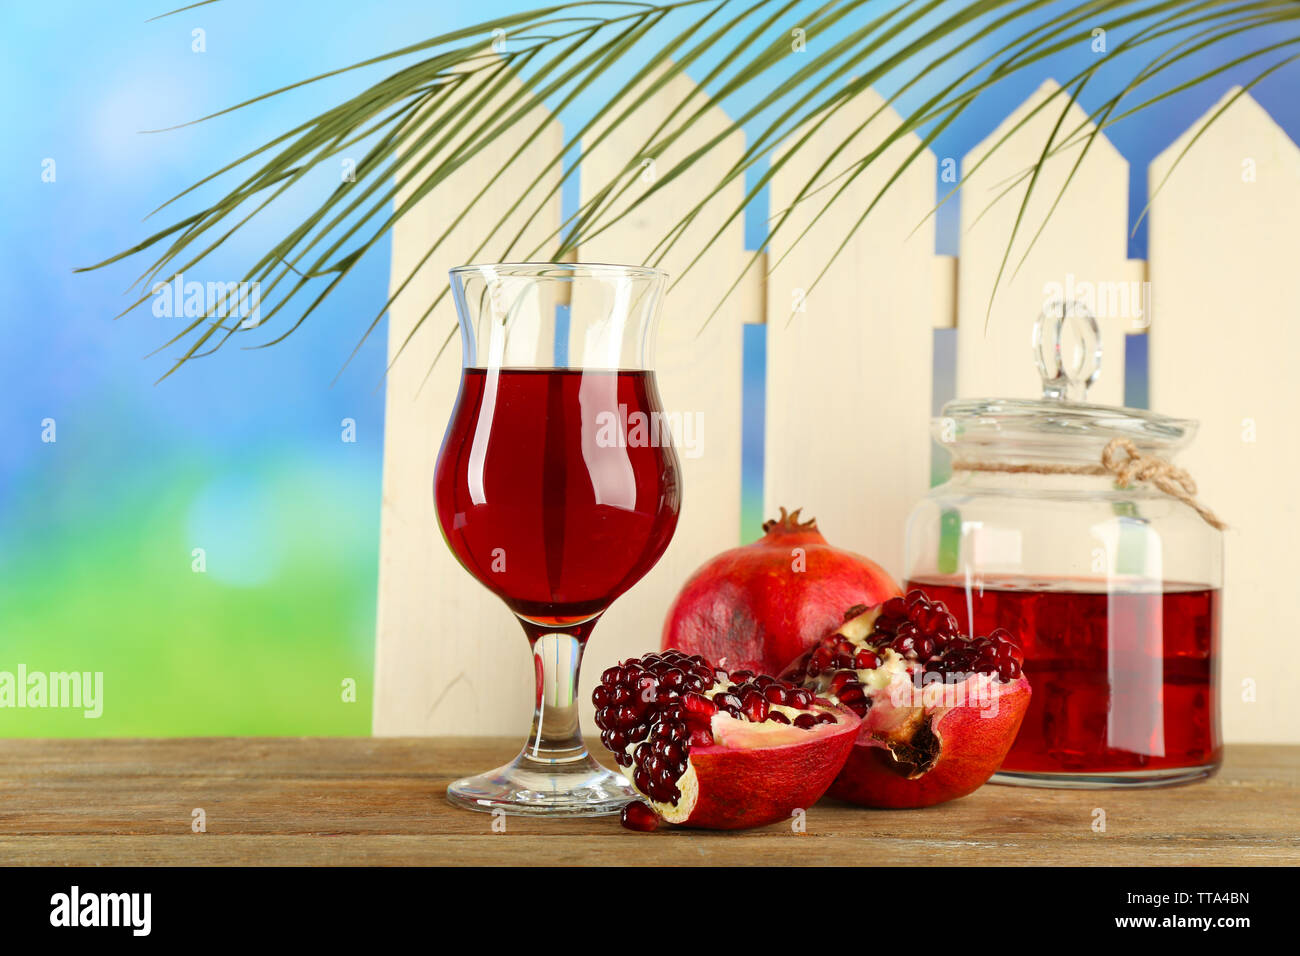 Pomegranate and glass of juice on wooden table and wight fence background Stock Photo